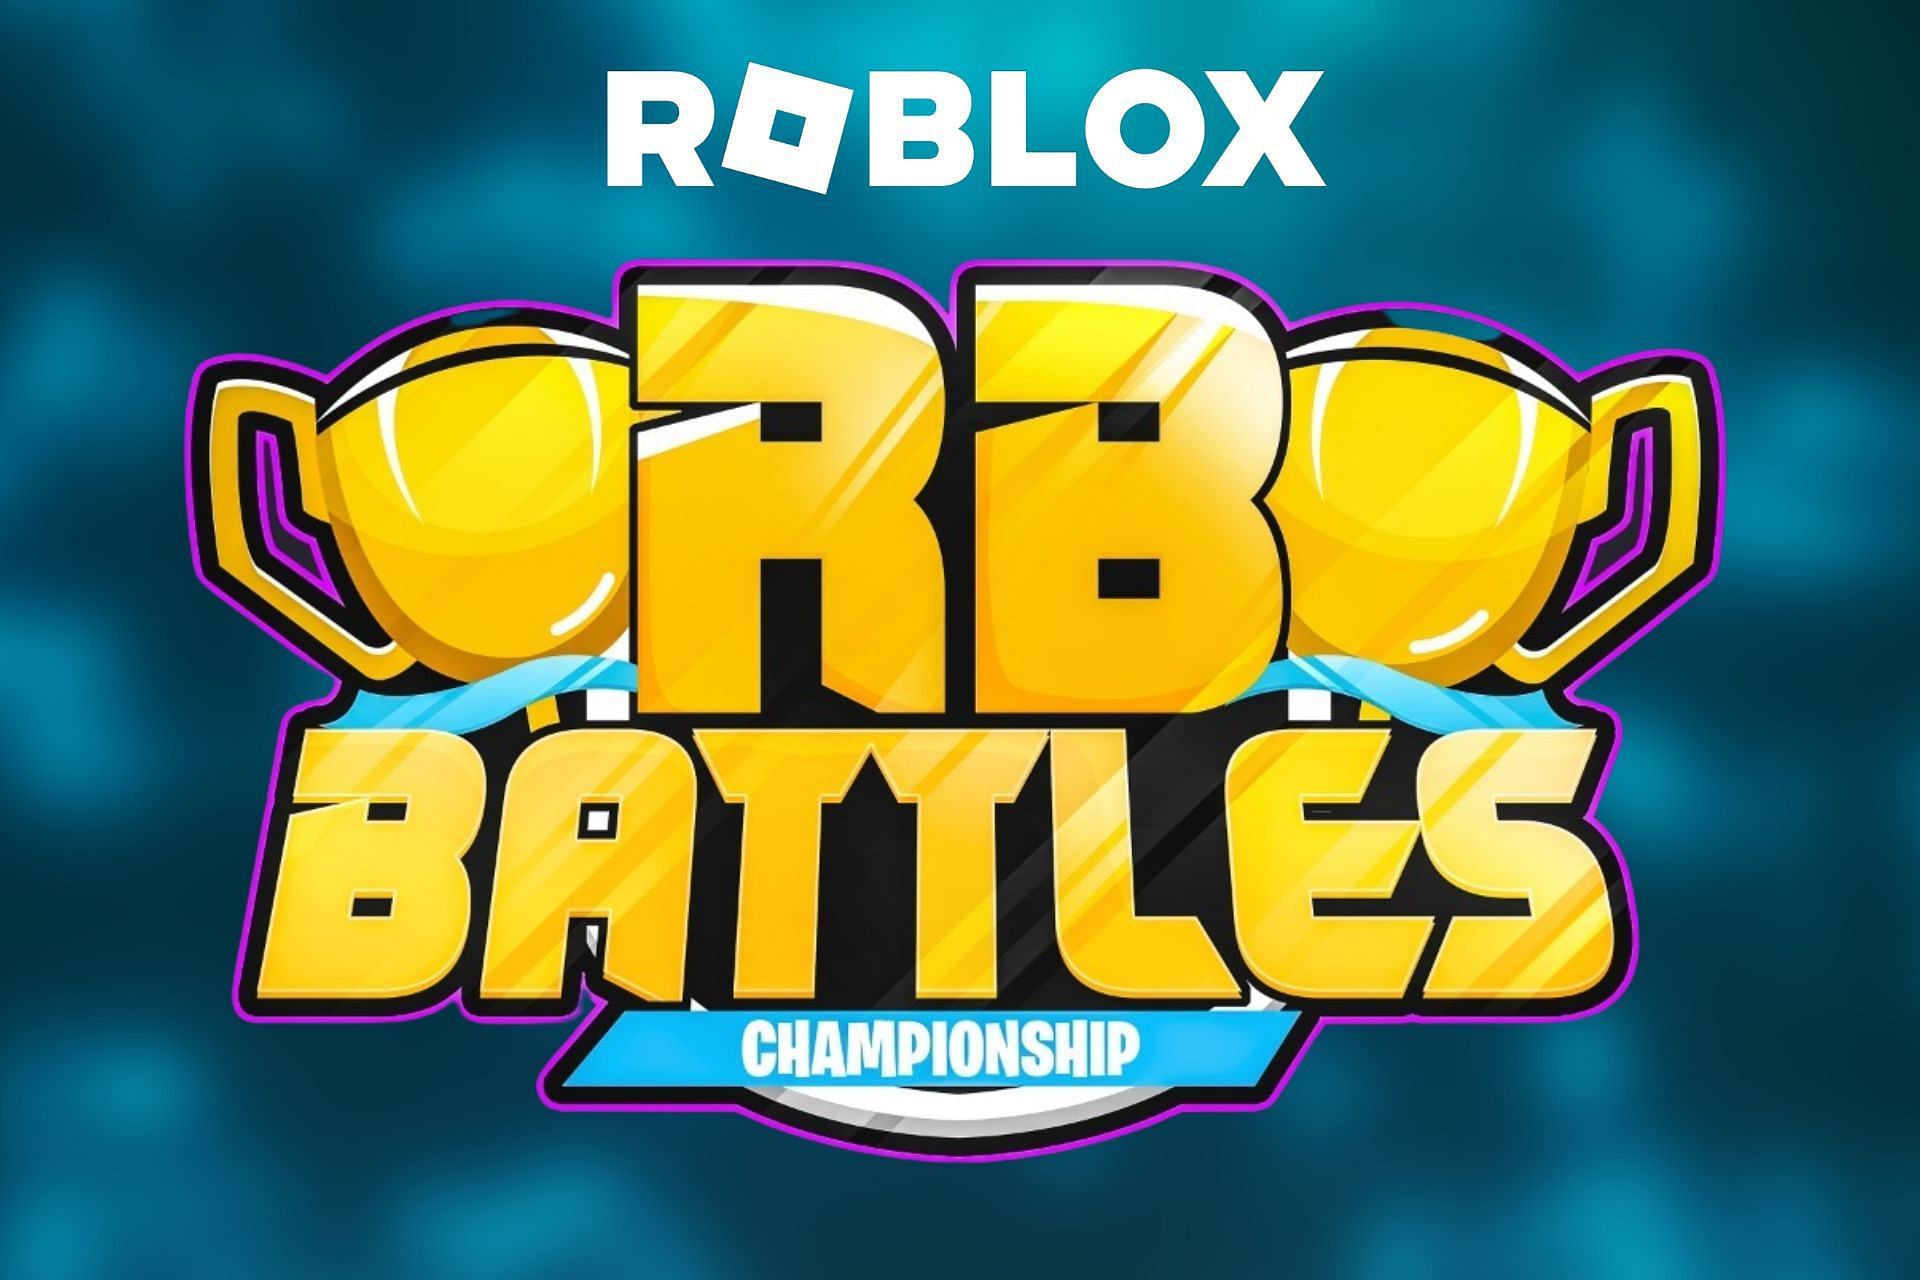 Denis vs Calixo playing Roblox Super Golf! in RB Battles Season 3  Championship: Round details and more